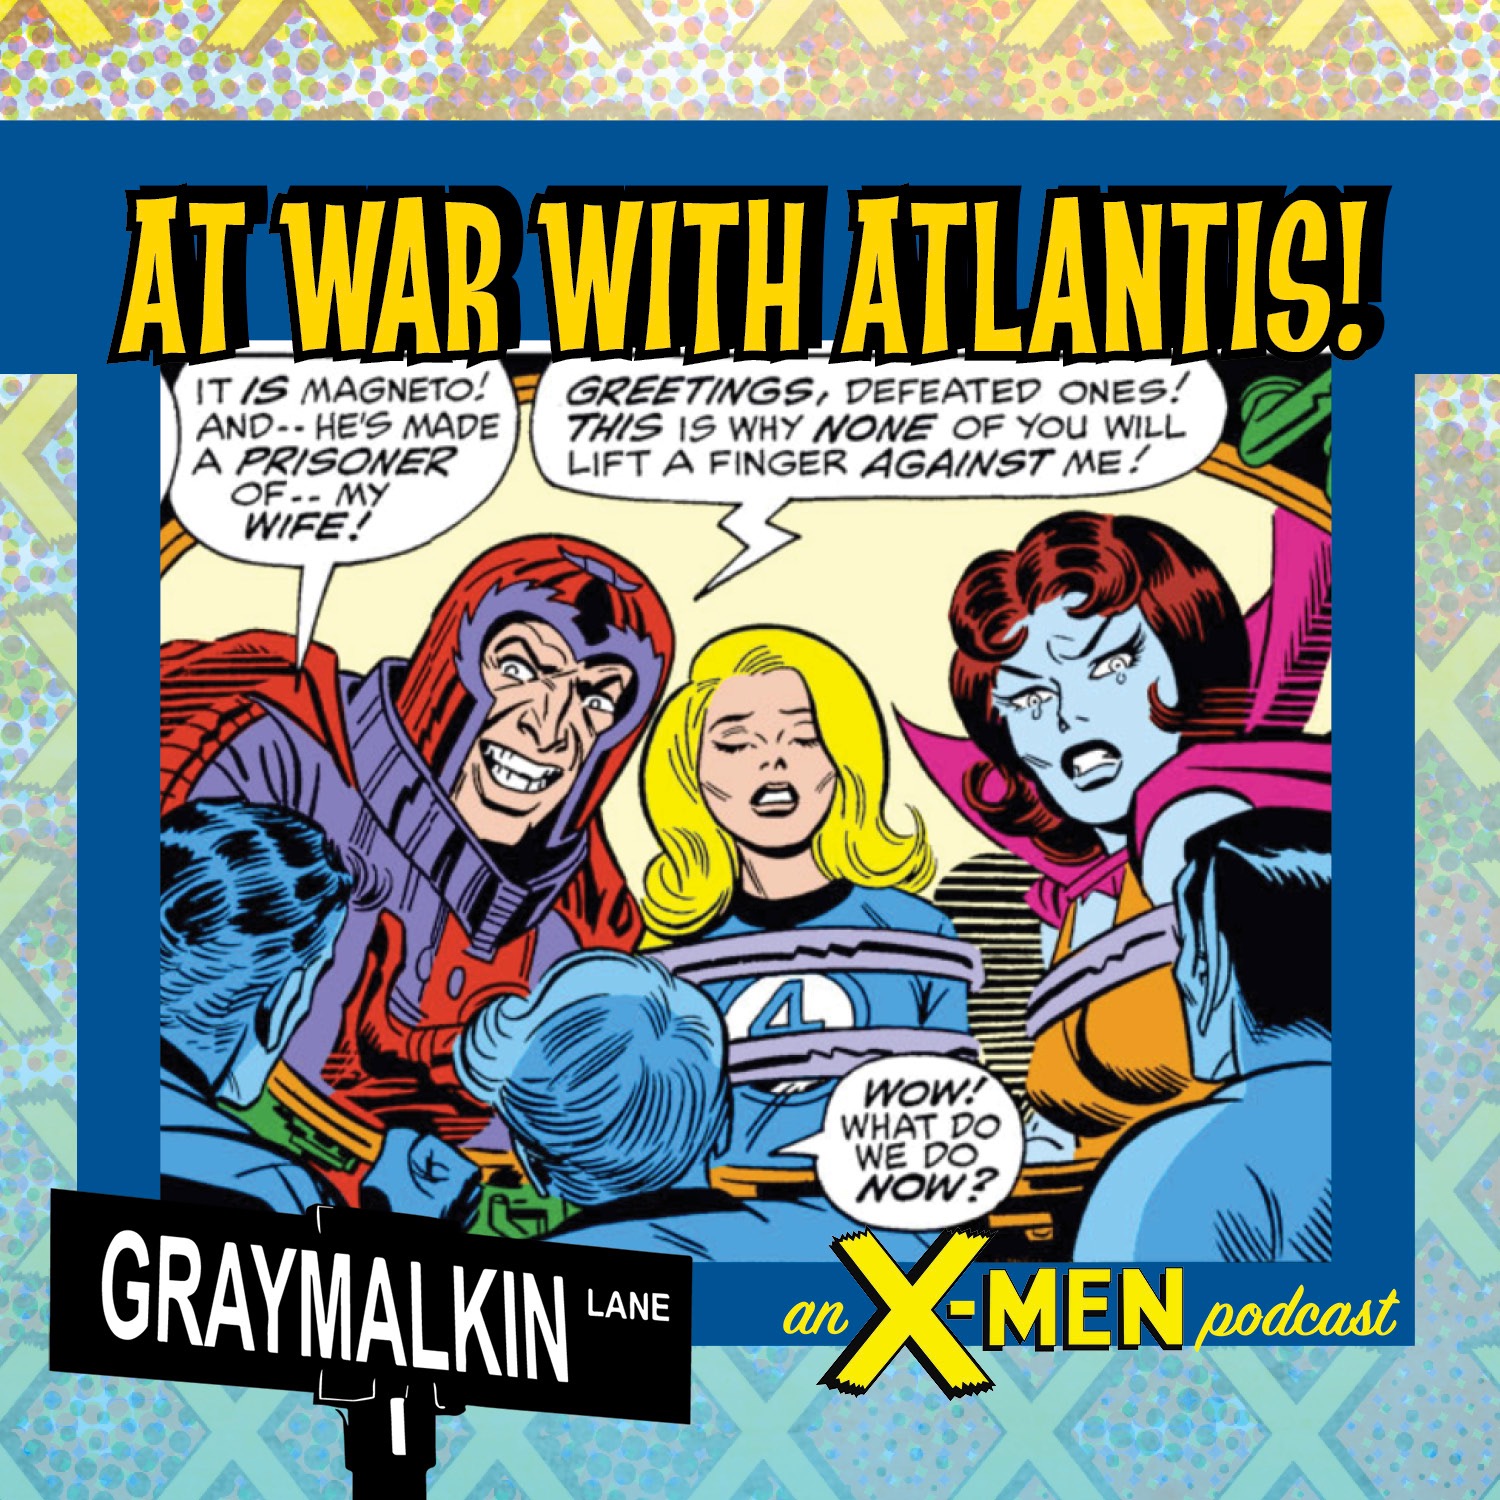 Fantastic Four 103: At War With Atlantis! Featuring Jeremy Whitley, Alex Segura, and Justin Kosmachuk!